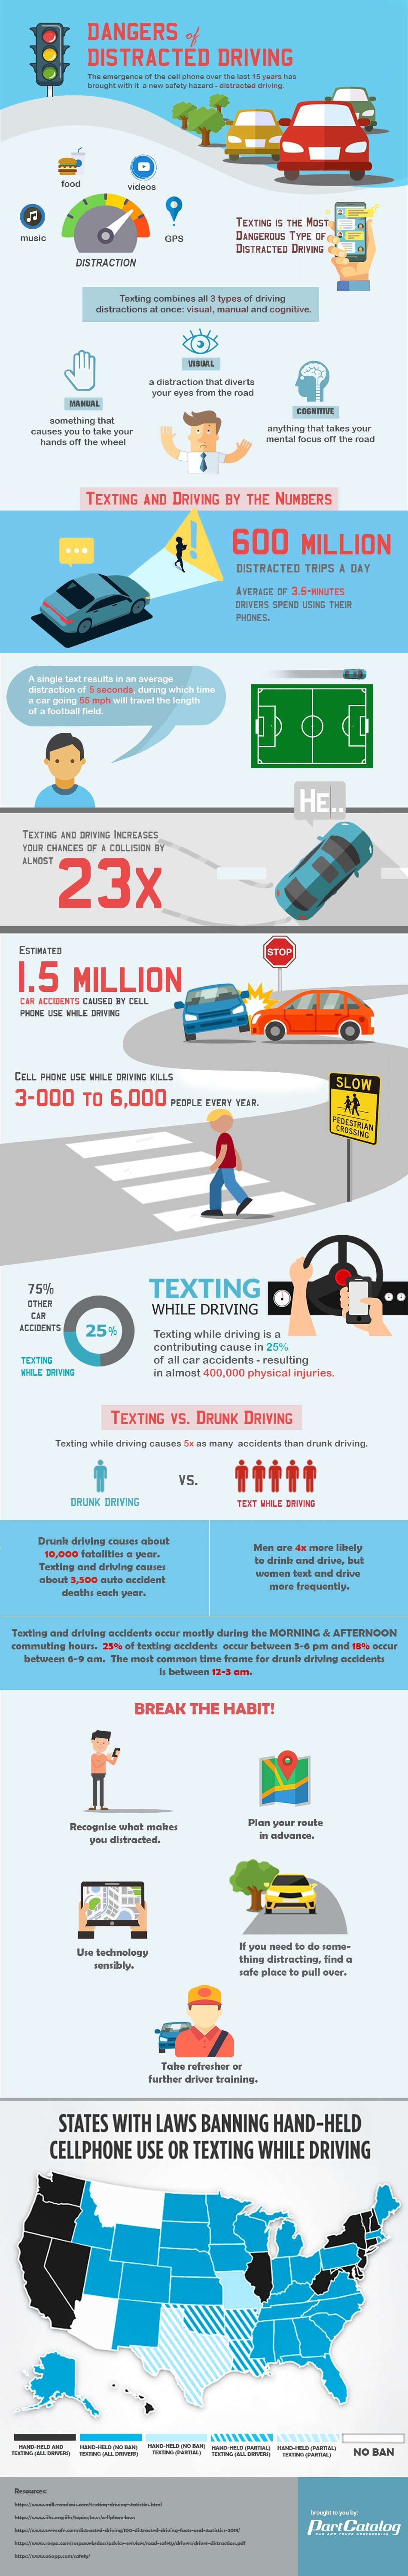 Dangers of Distracted Driving